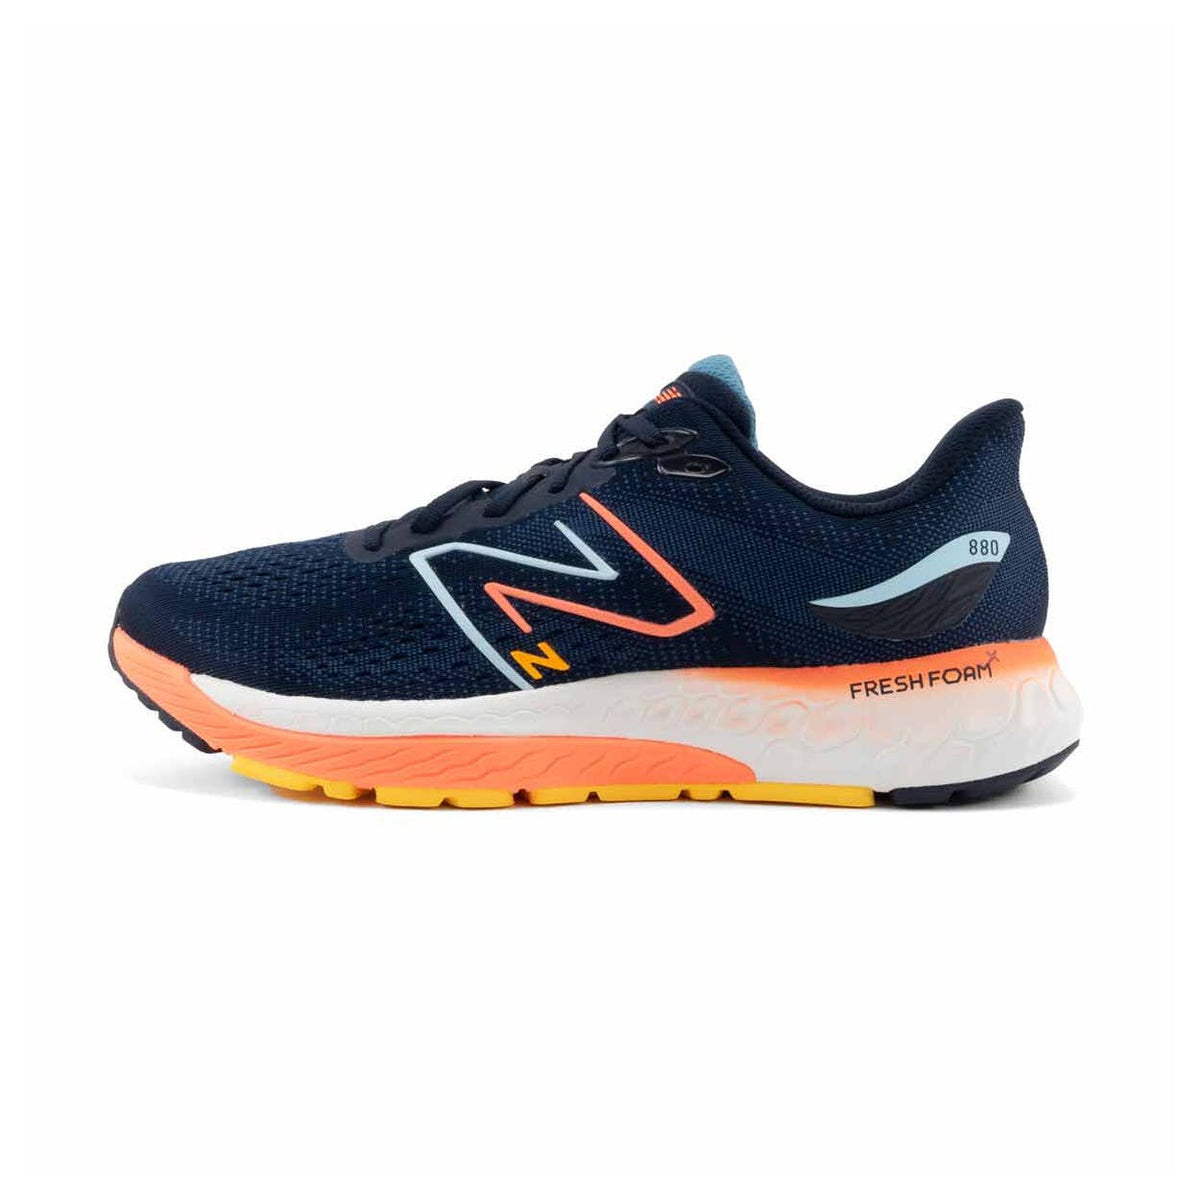 A navy blue New Balance 880v12 running shoe with orange accents and a white sole, featuring the Fresh Foam X technology and the model number 880v12.